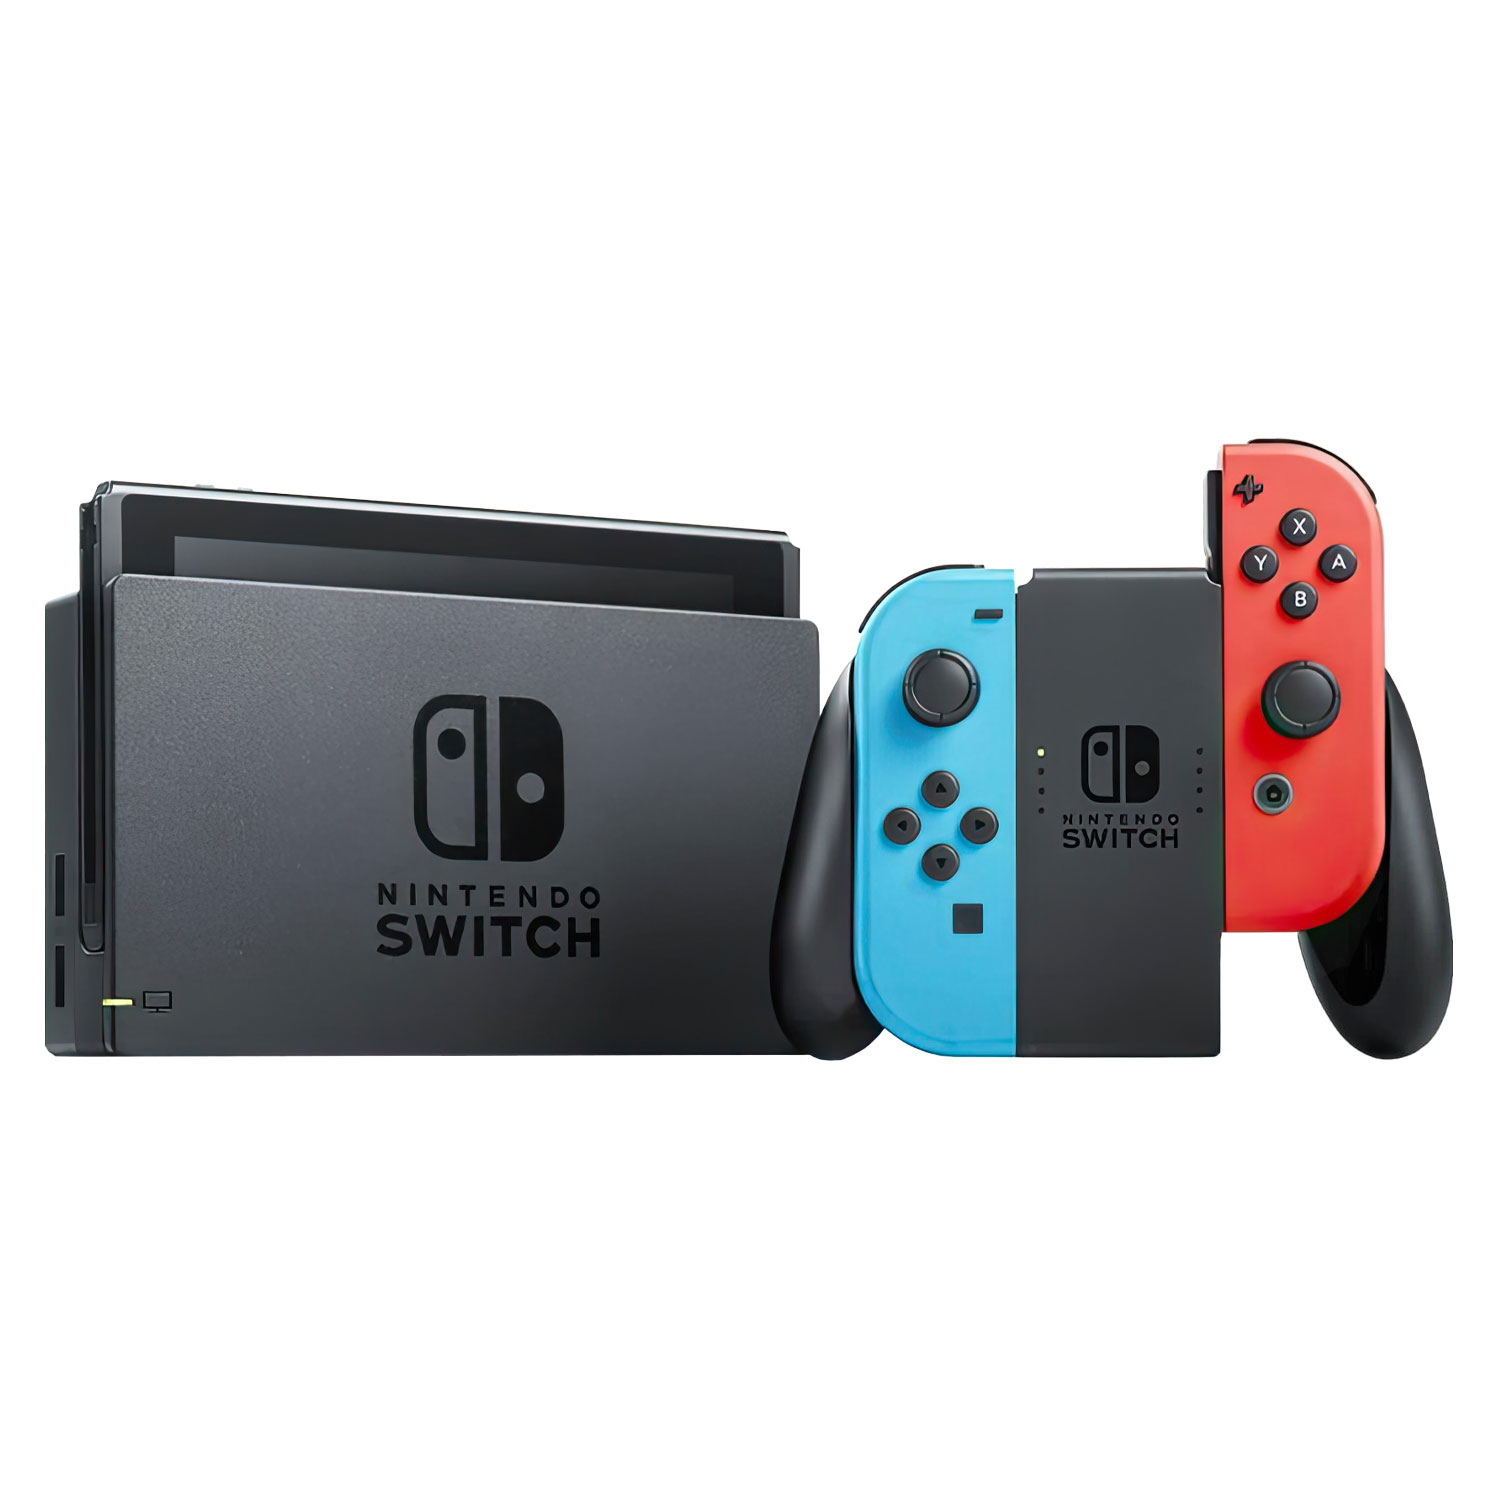 Console Nintendo Switch 32GB Japão - Neon (HAD-S-KABAH)